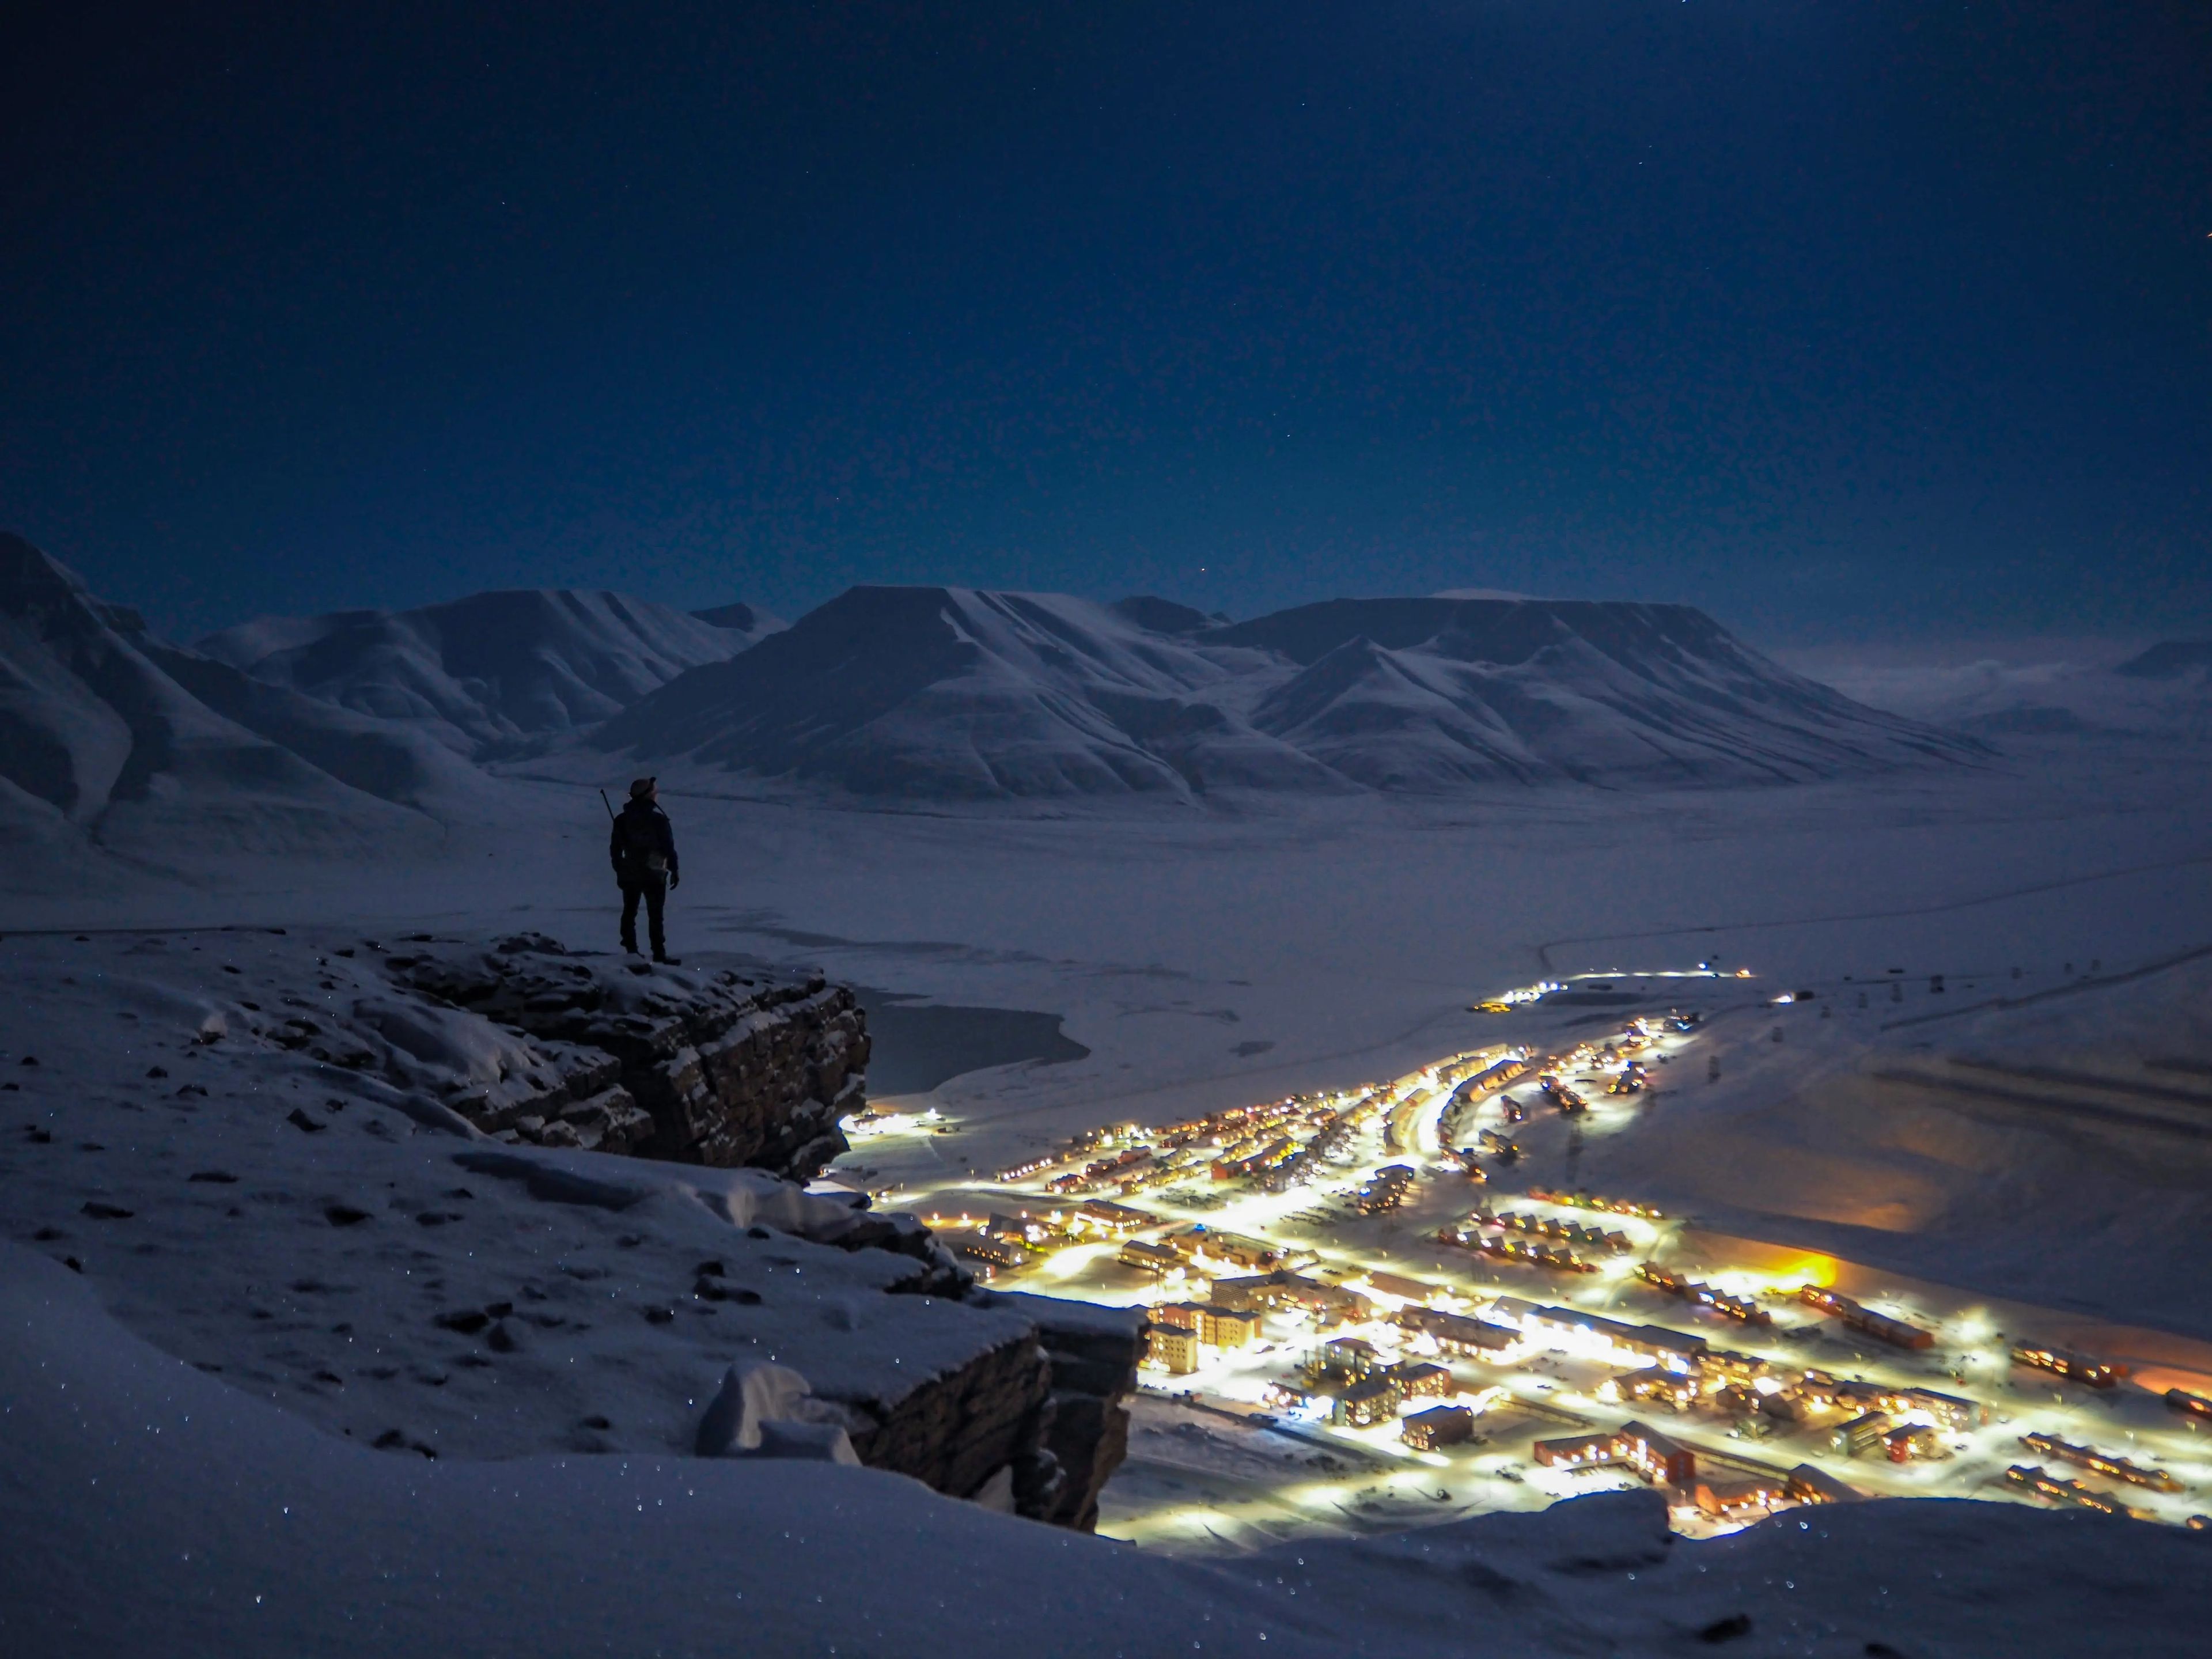 The writer stands on a mountain cliff overlooking a lit up town during the night